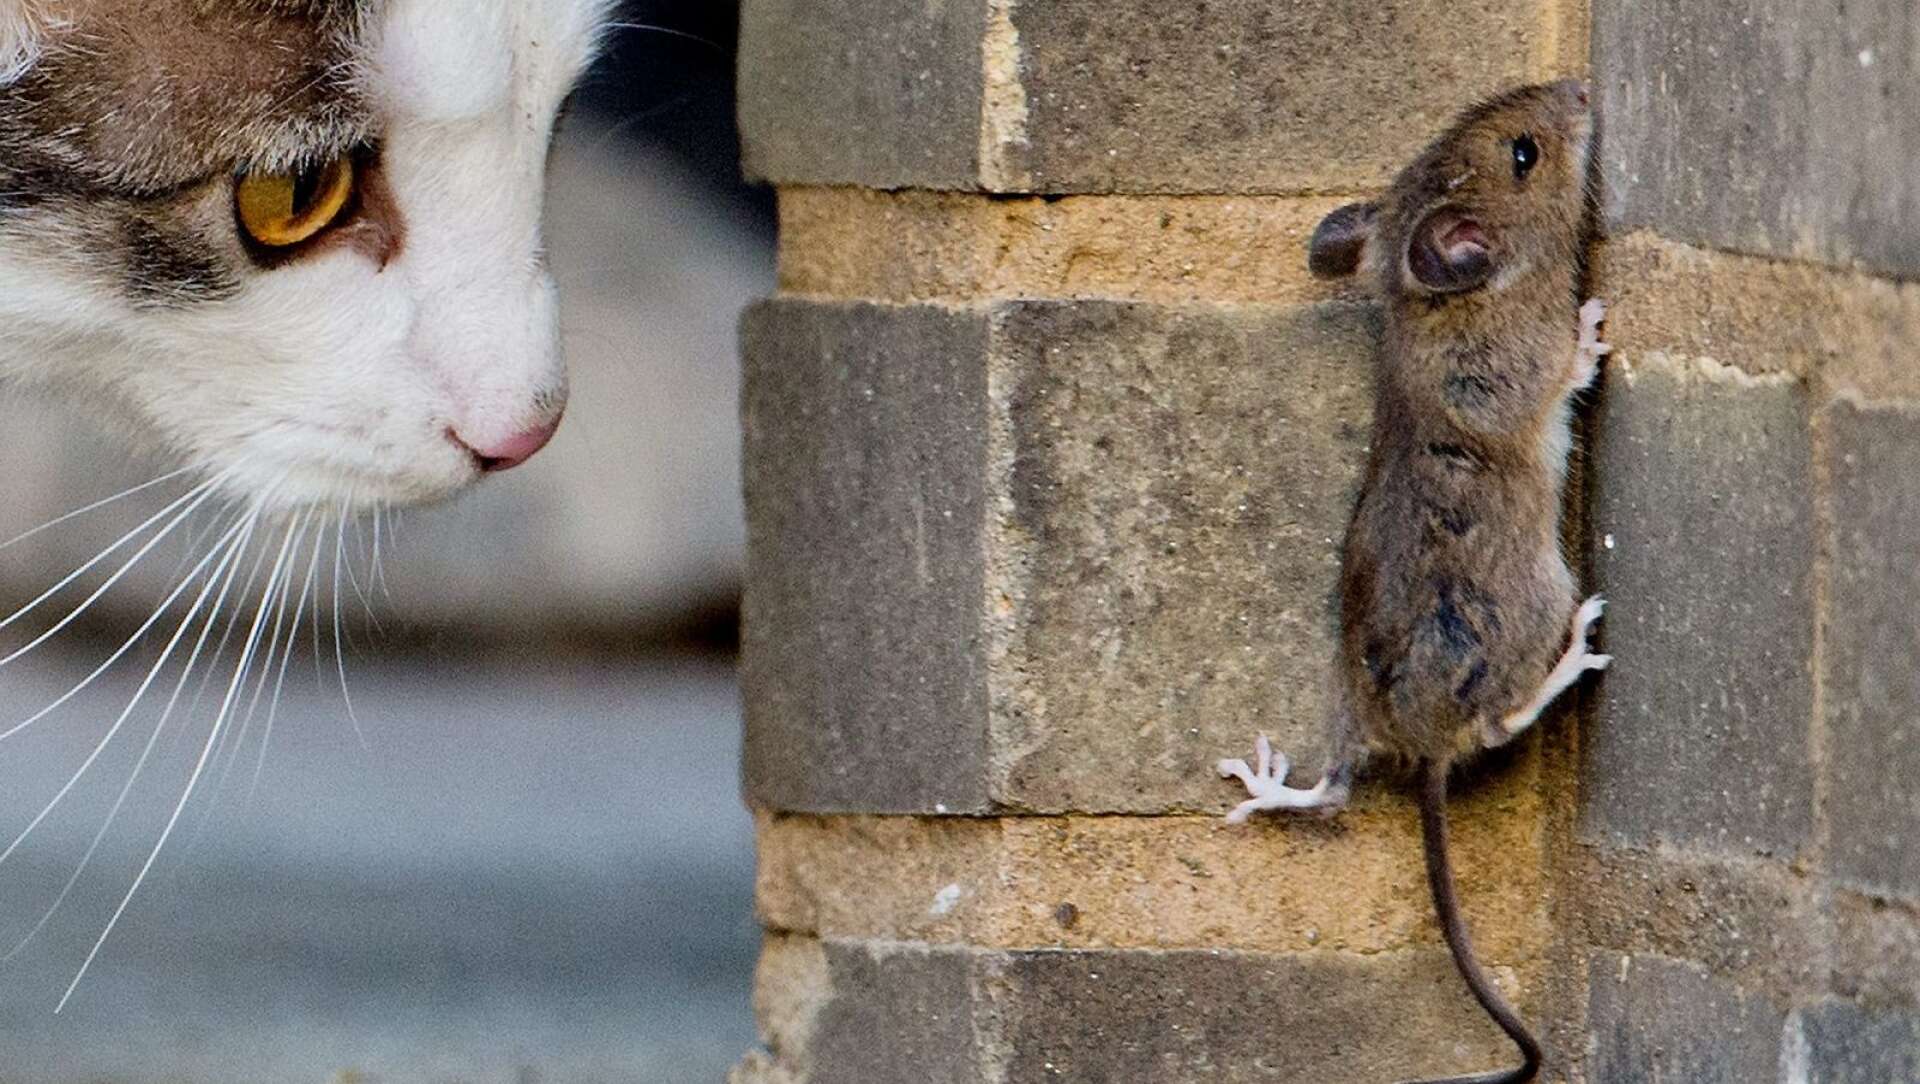 A cat watches a mouse in Hannover, Germany, 26 May 2014. (AP Photo, dpa Julian Stratenschulte)